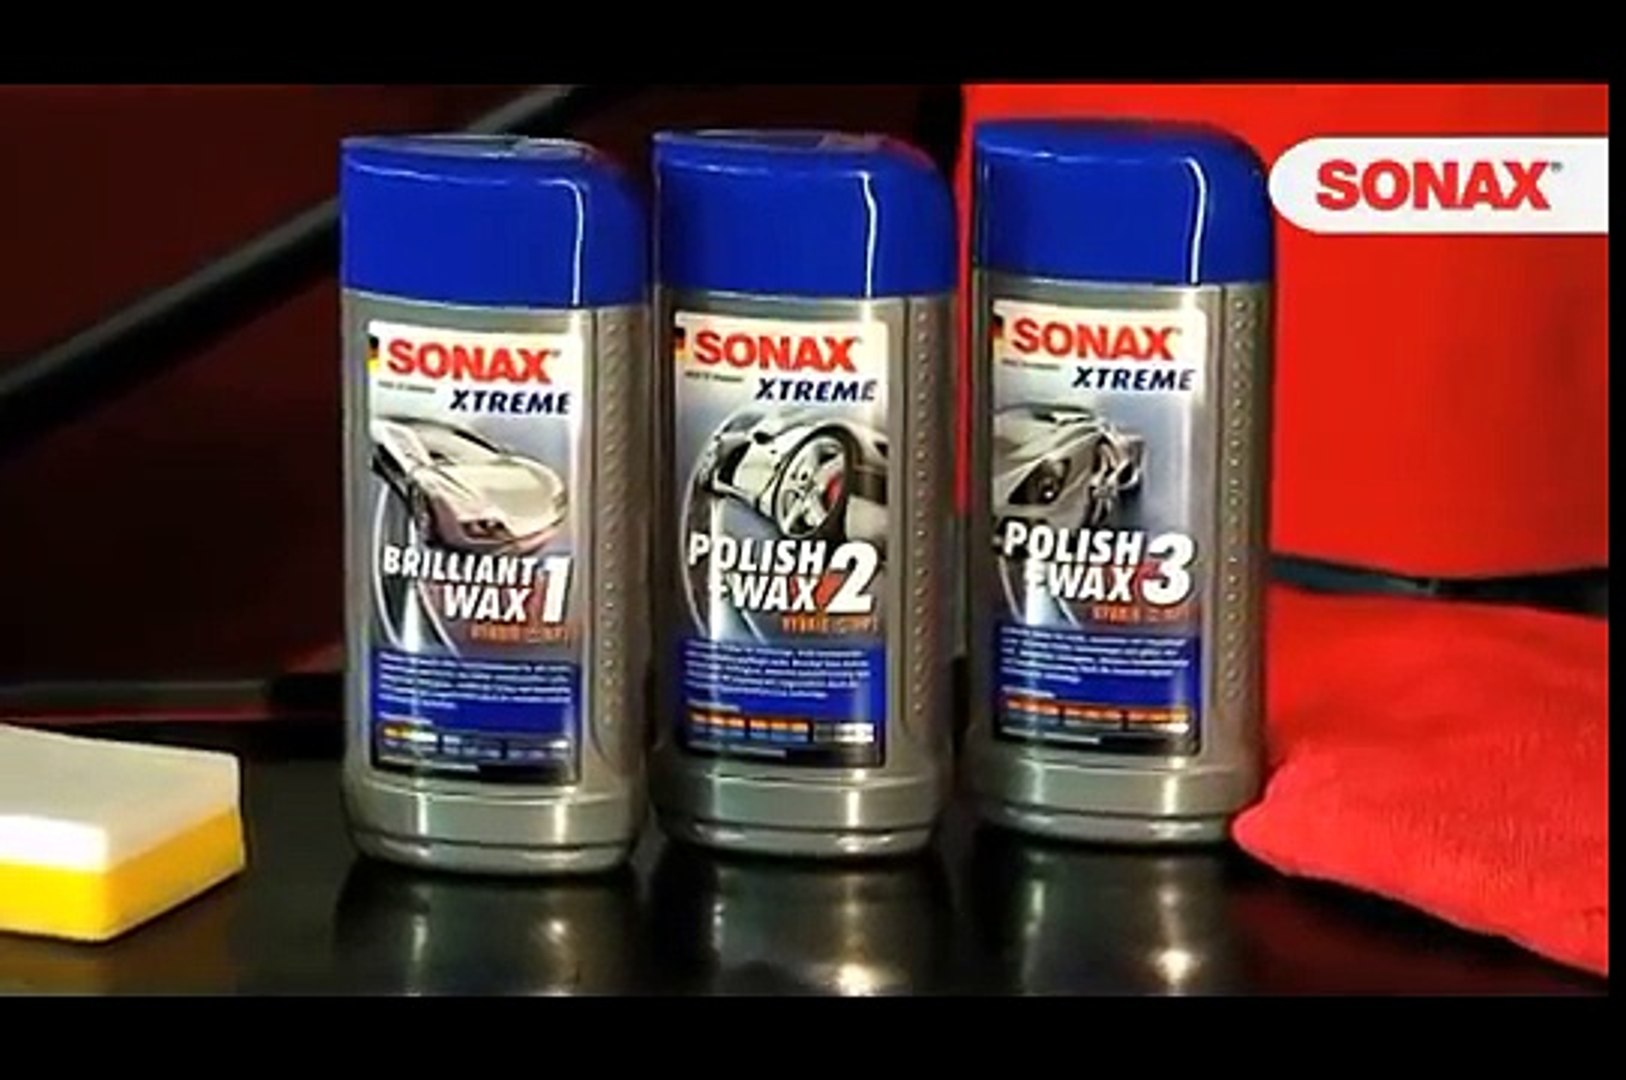 Sonax Xtreme 1, 2 & 3 Wax and Polish with Hybrid NPT - video Dailymotion